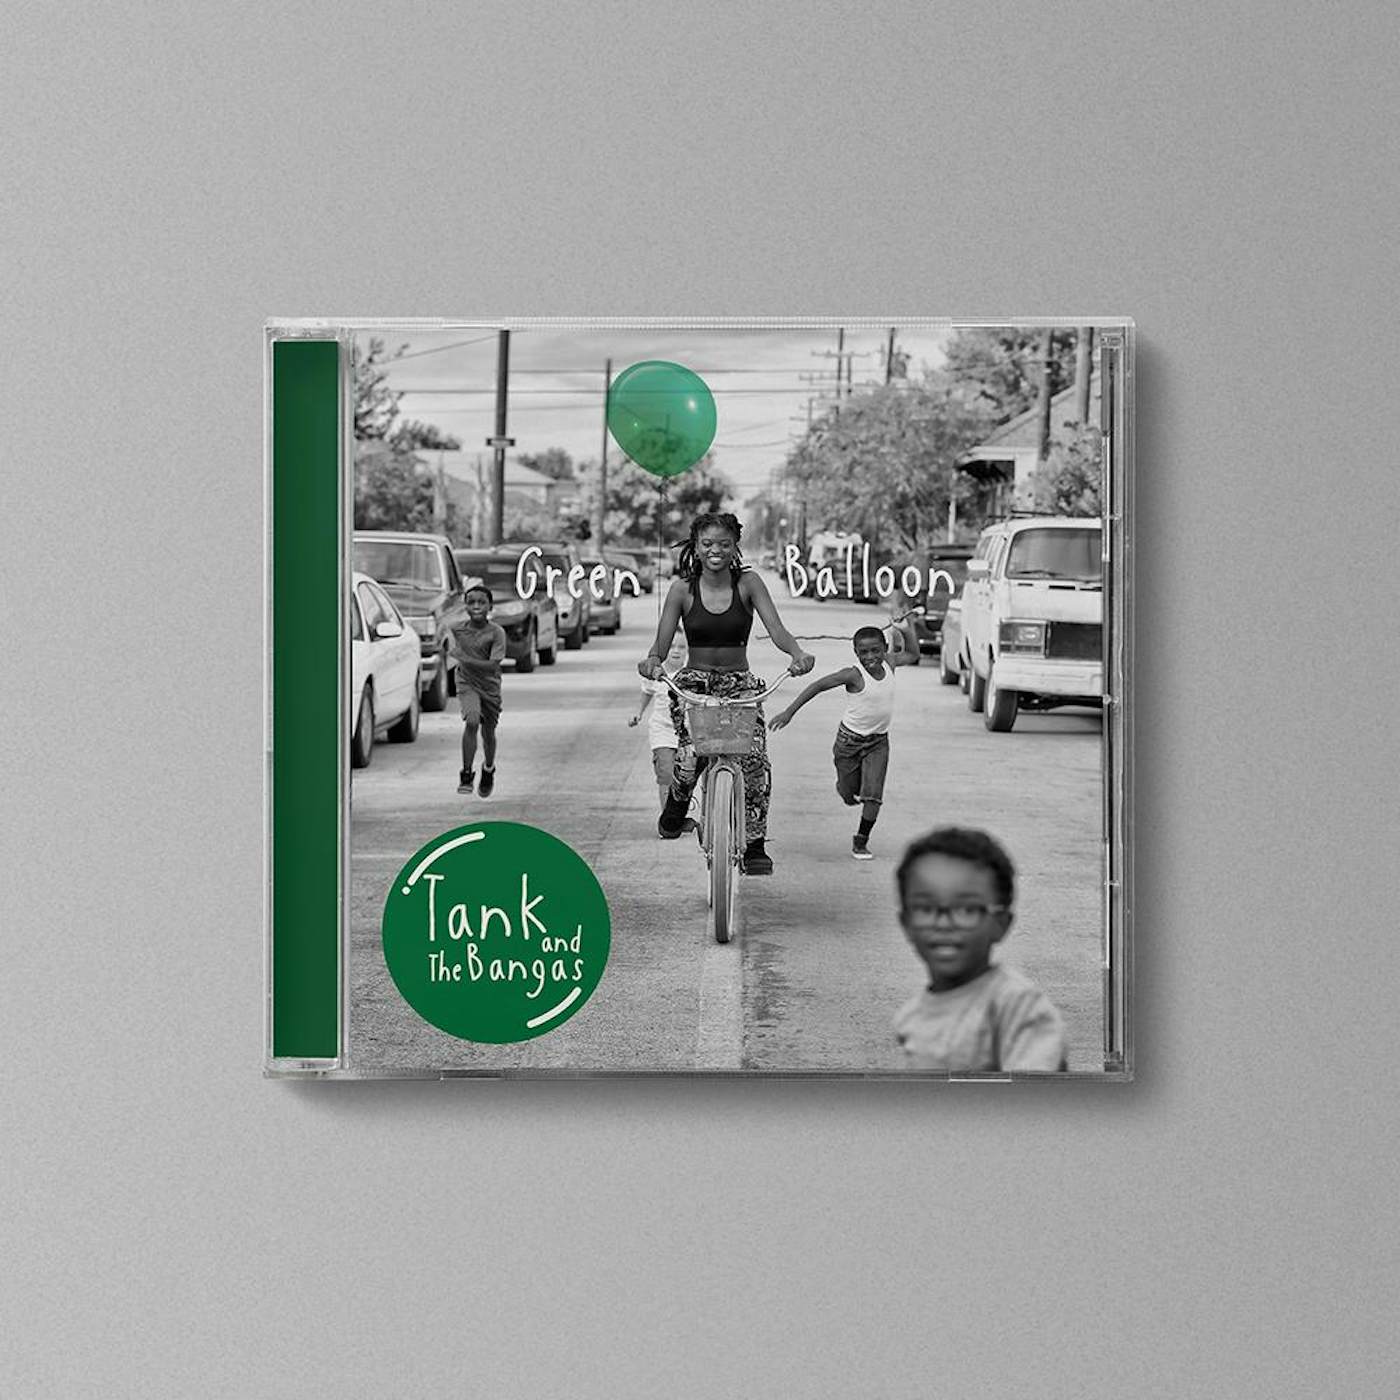 Tank and The Bangas Autographed Green Balloon CD